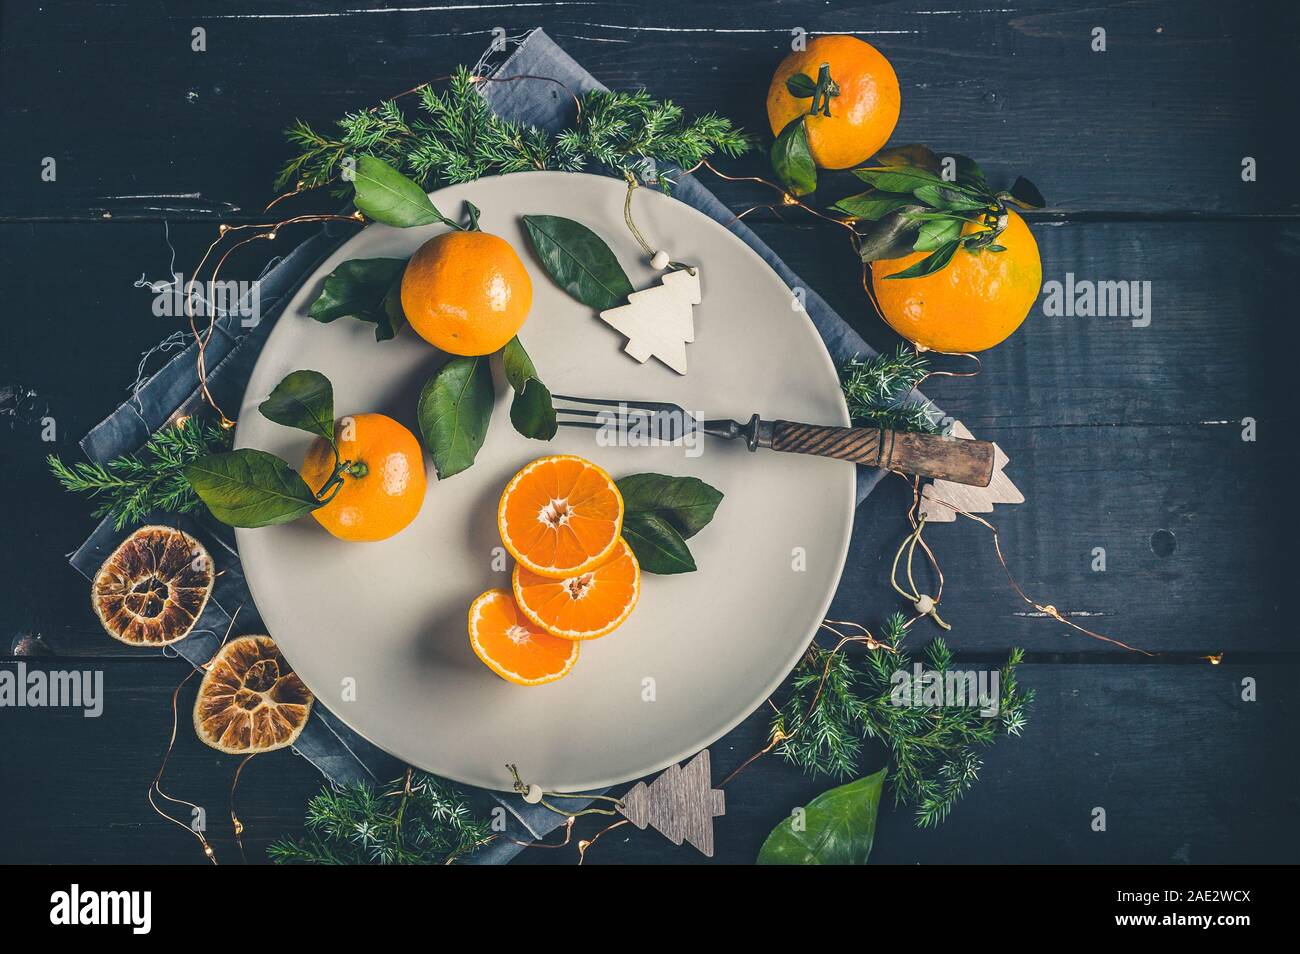 Tangerines on a festive Christmas rustic table setting with vintage dishes on a dark background. Top view Stock Photo